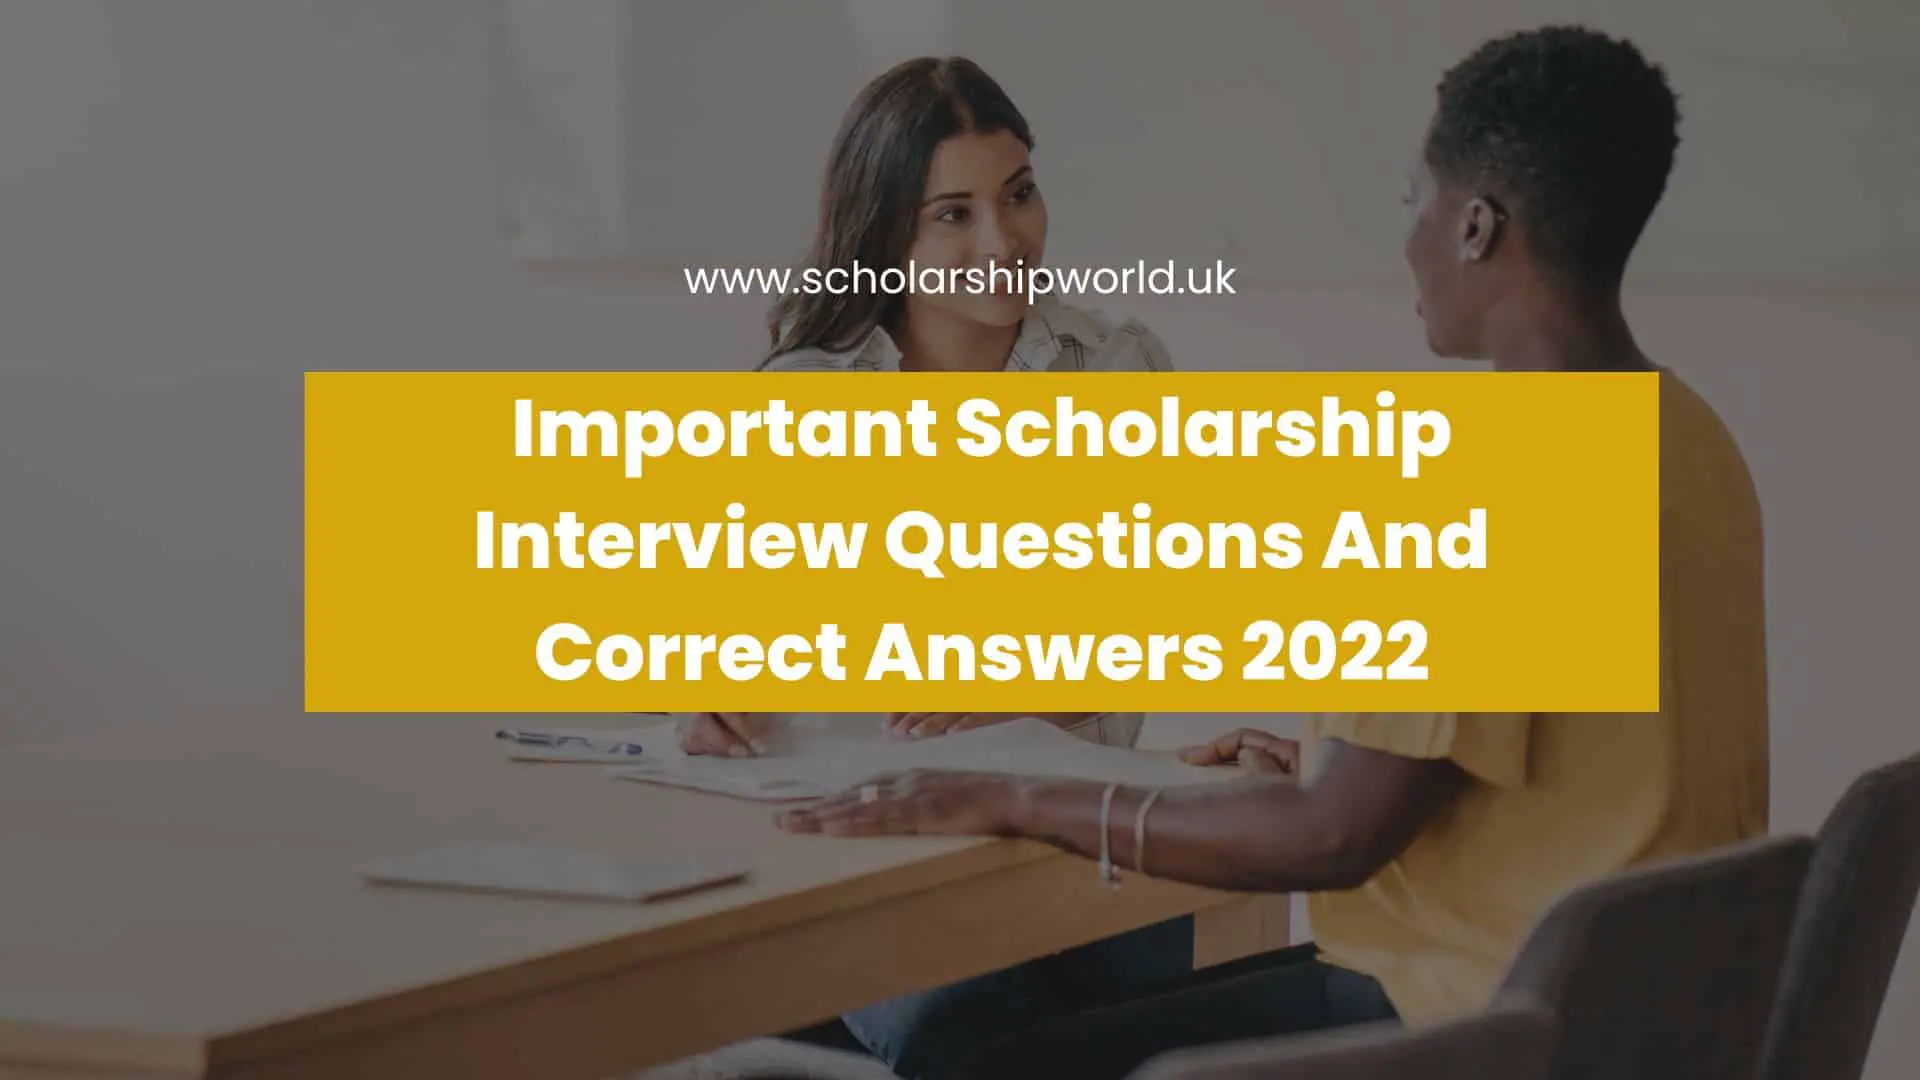 Important Scholarship Interview Questions And Correct Answers 2022